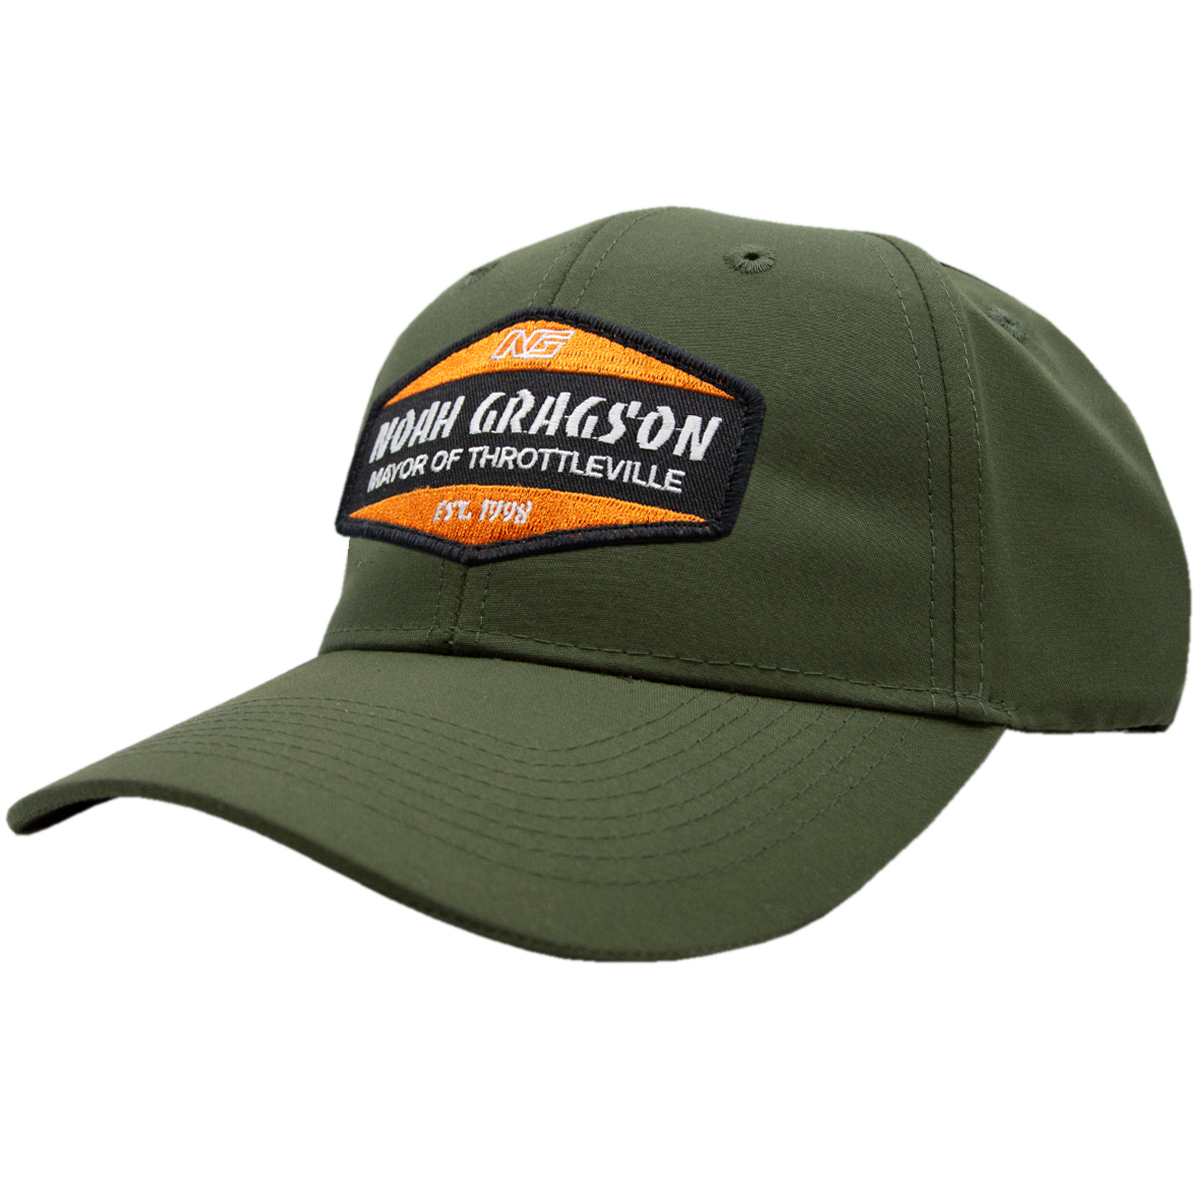 Mayor of Throttleville Patch Classic Twill Cap